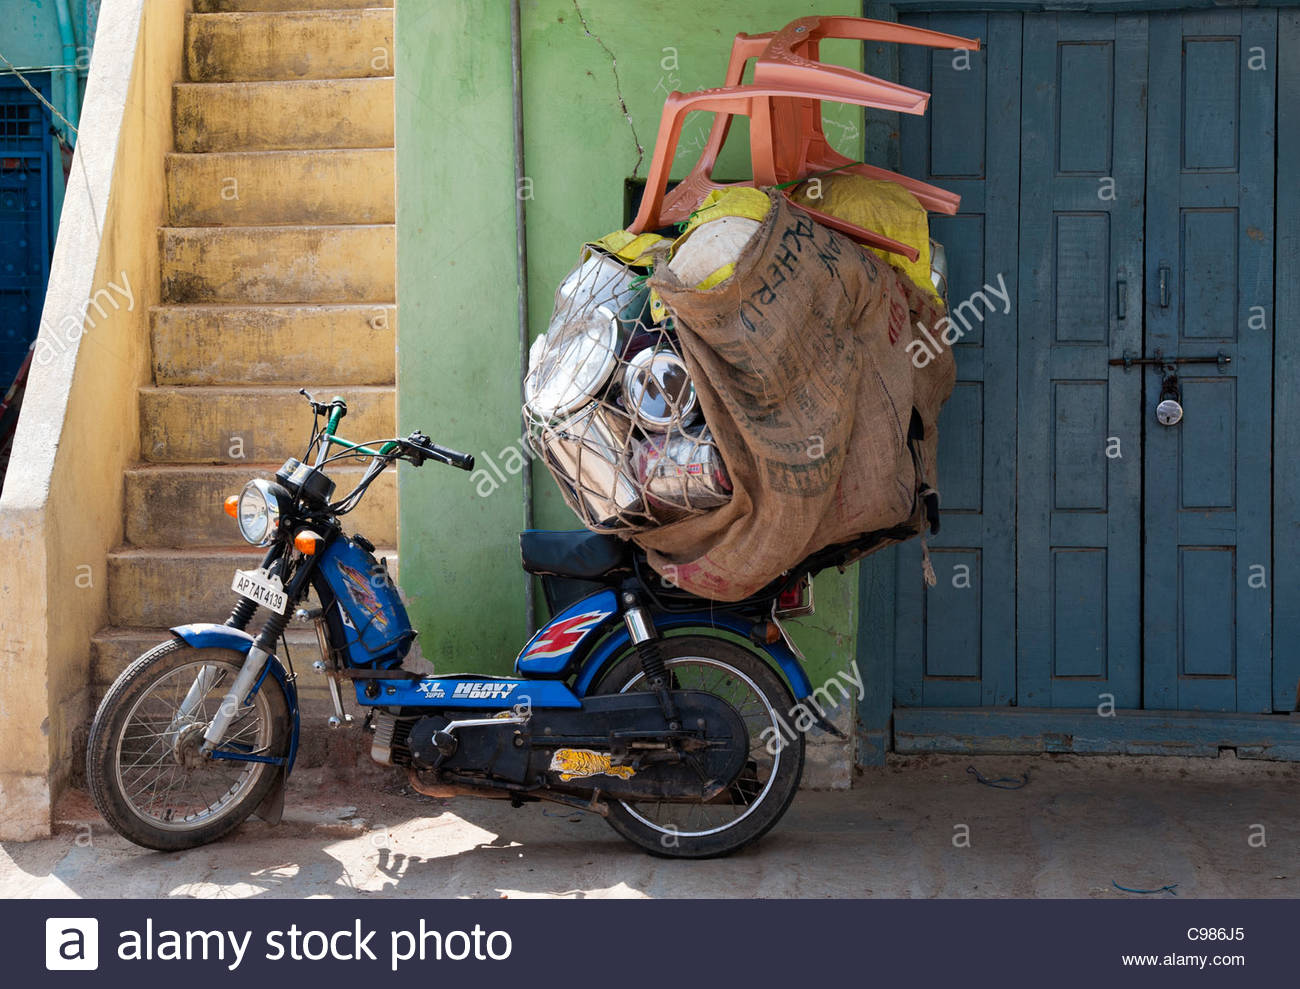 Indian moped ladened with goods to sell to local shops on the streets of  Puttaparthi, Andhra Pradesh, India